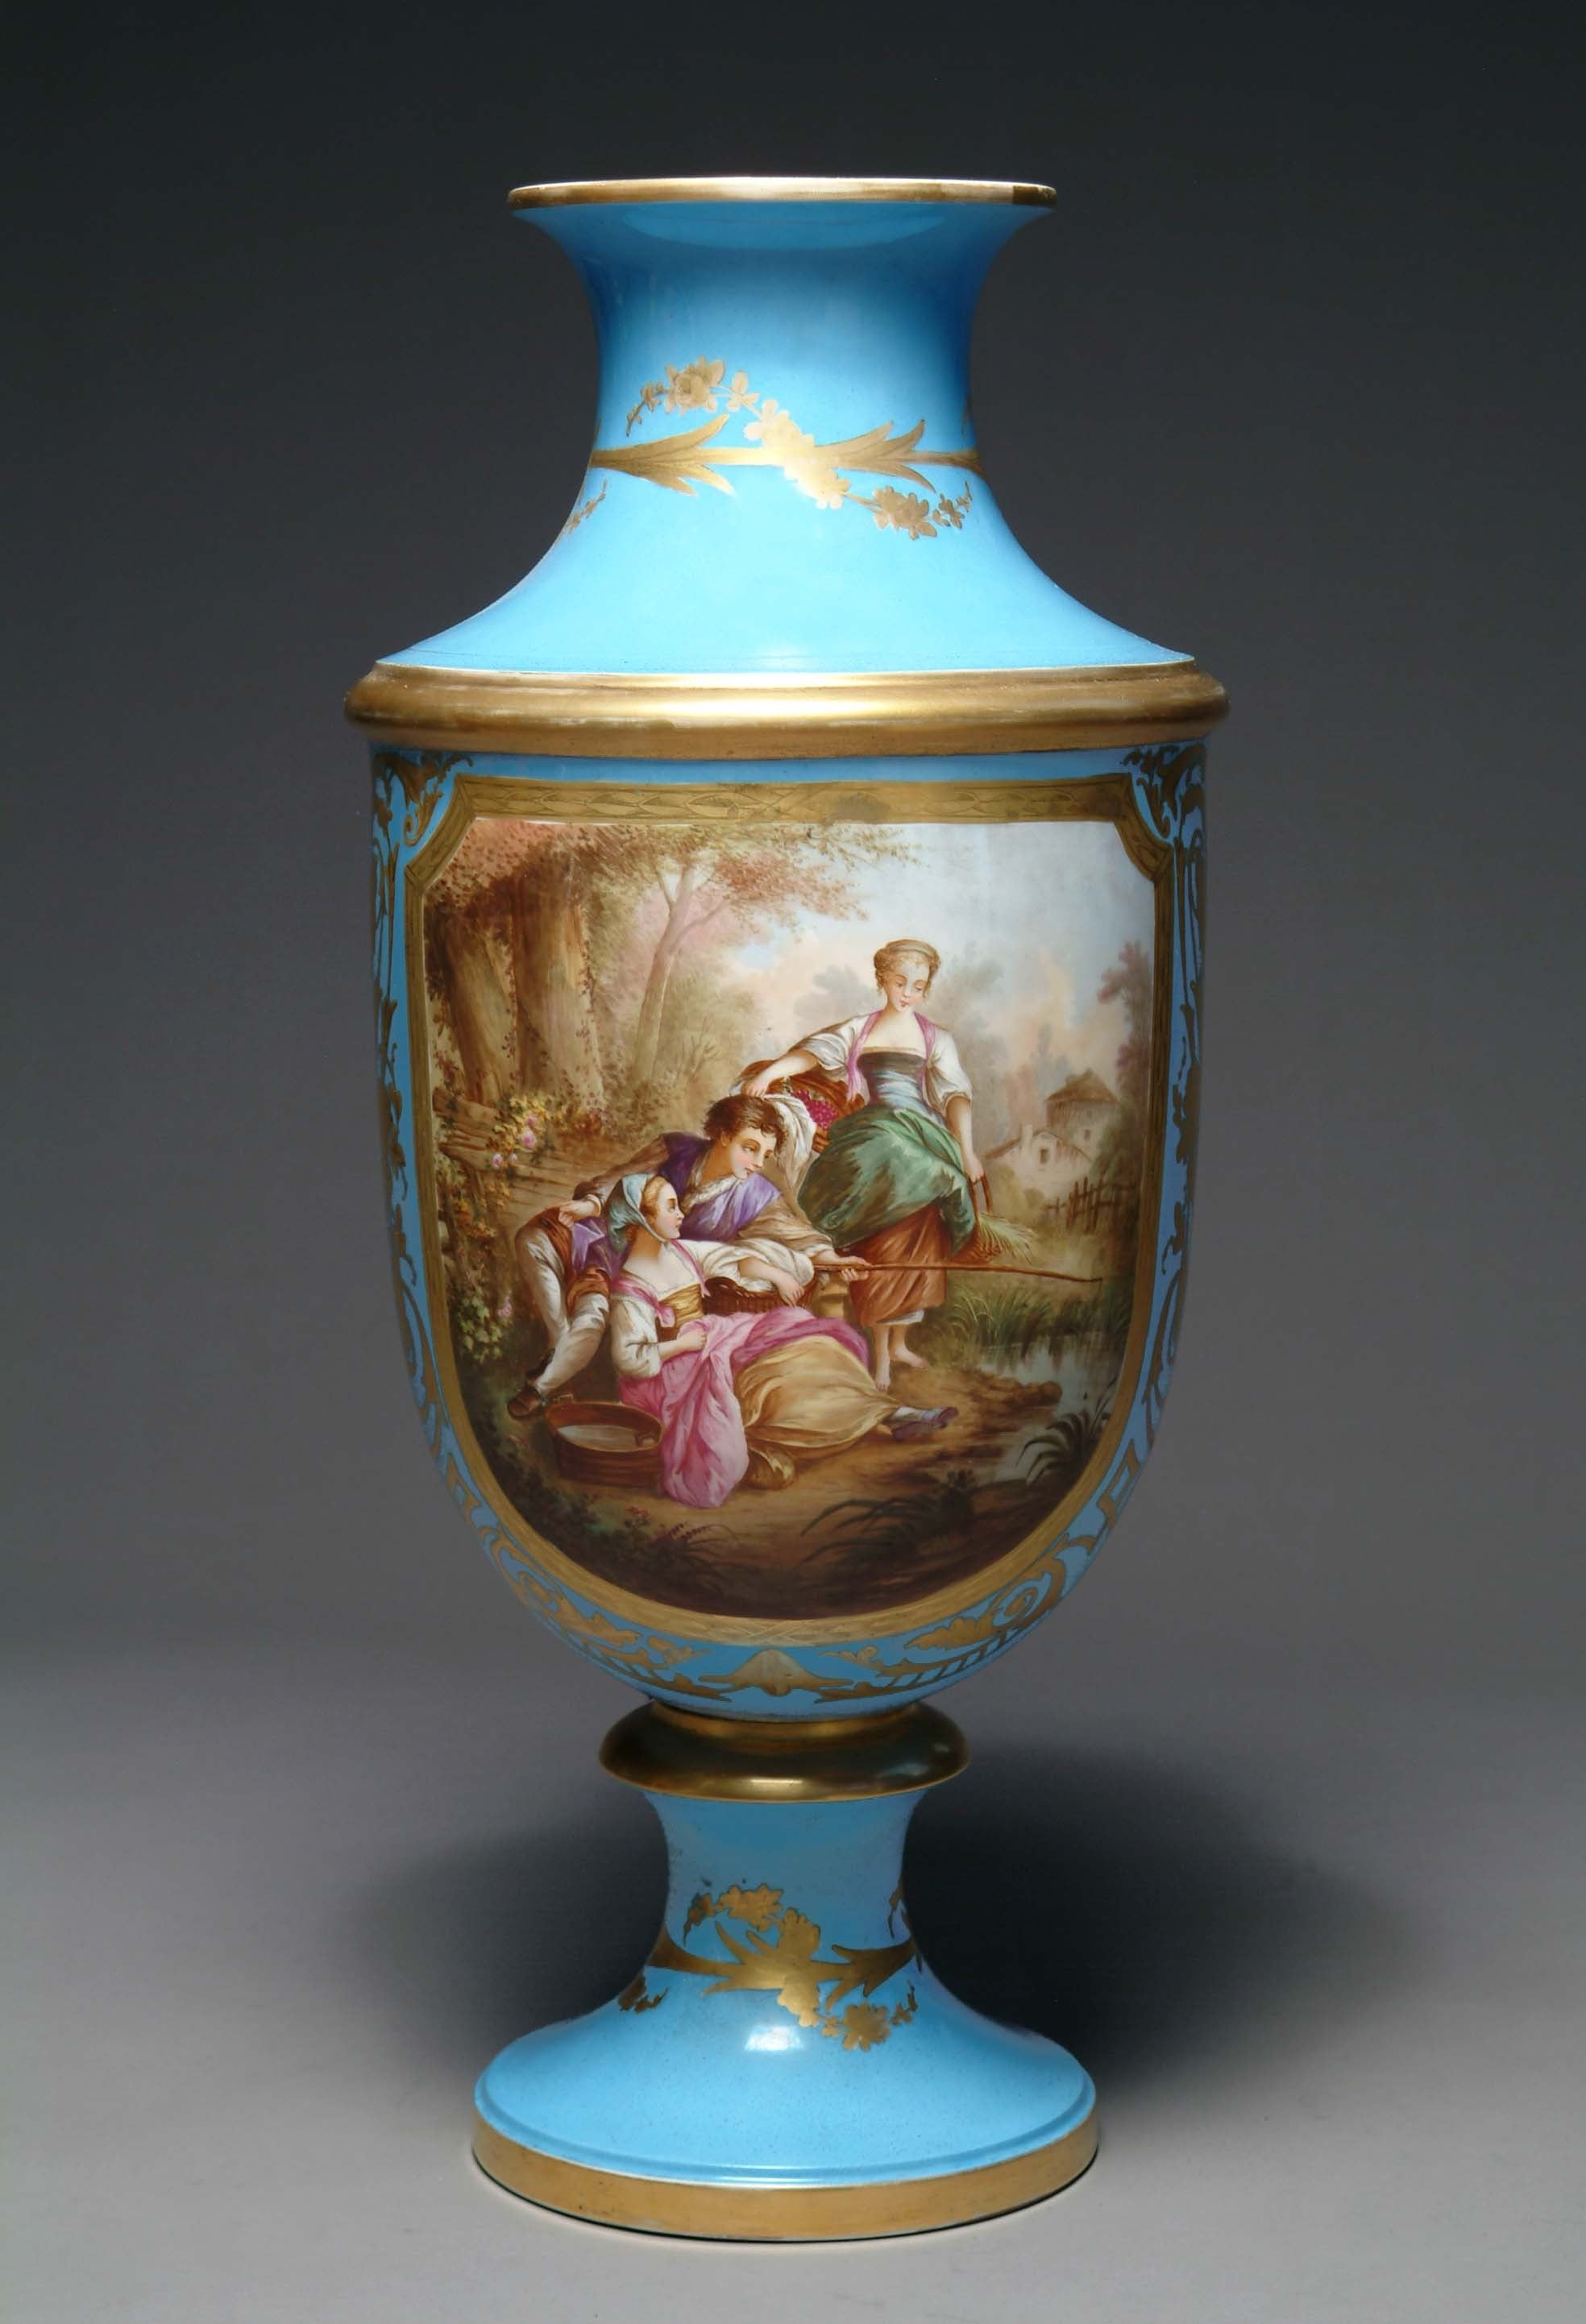 19th Century French Hand-Painted Sevres Style Turquoise Porcelain Vase